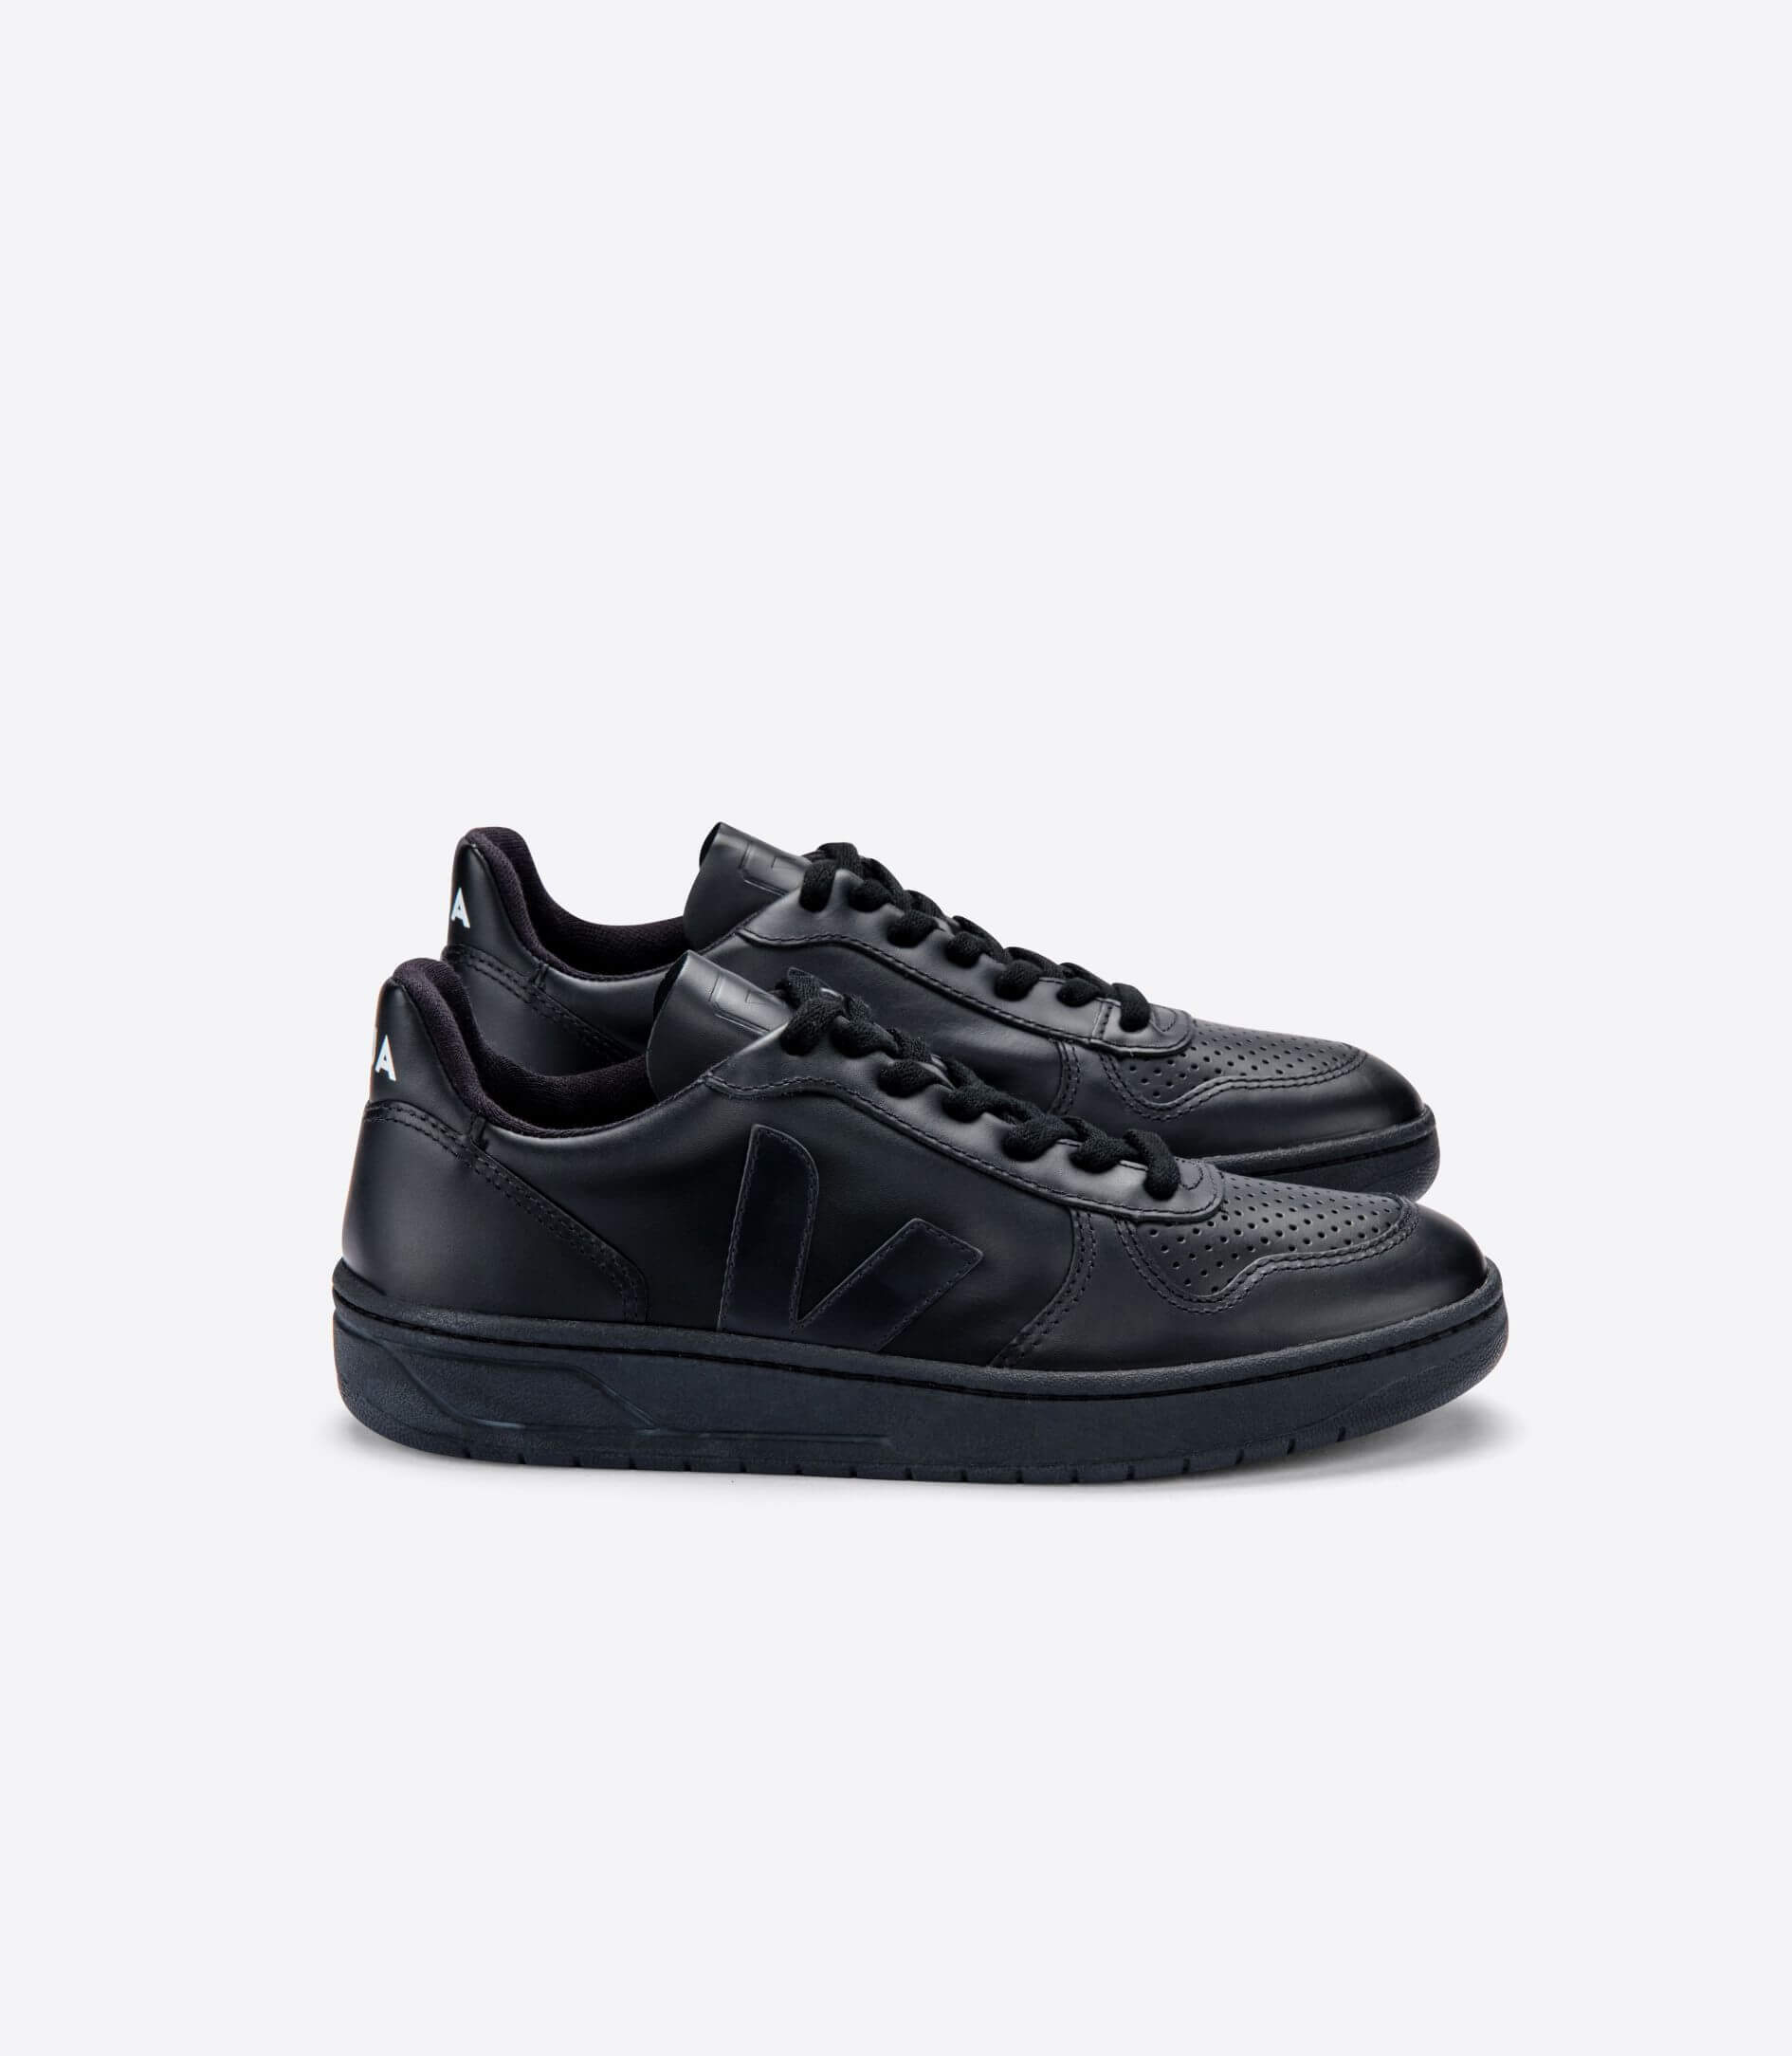 shoes similar to air force ones